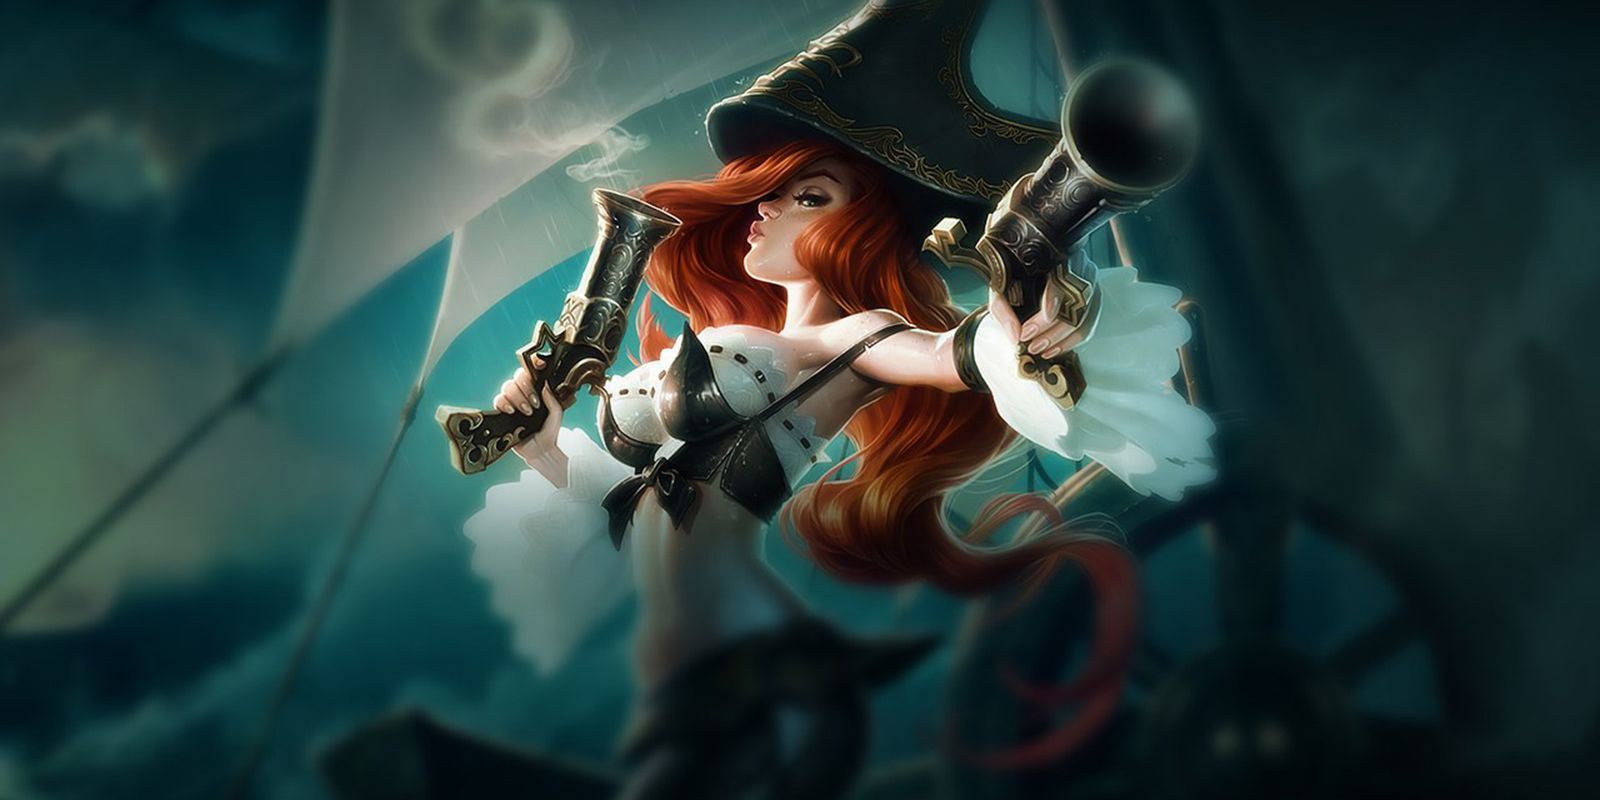 Miss Fortune Blowing On Her Pistol After Using HerUltimate